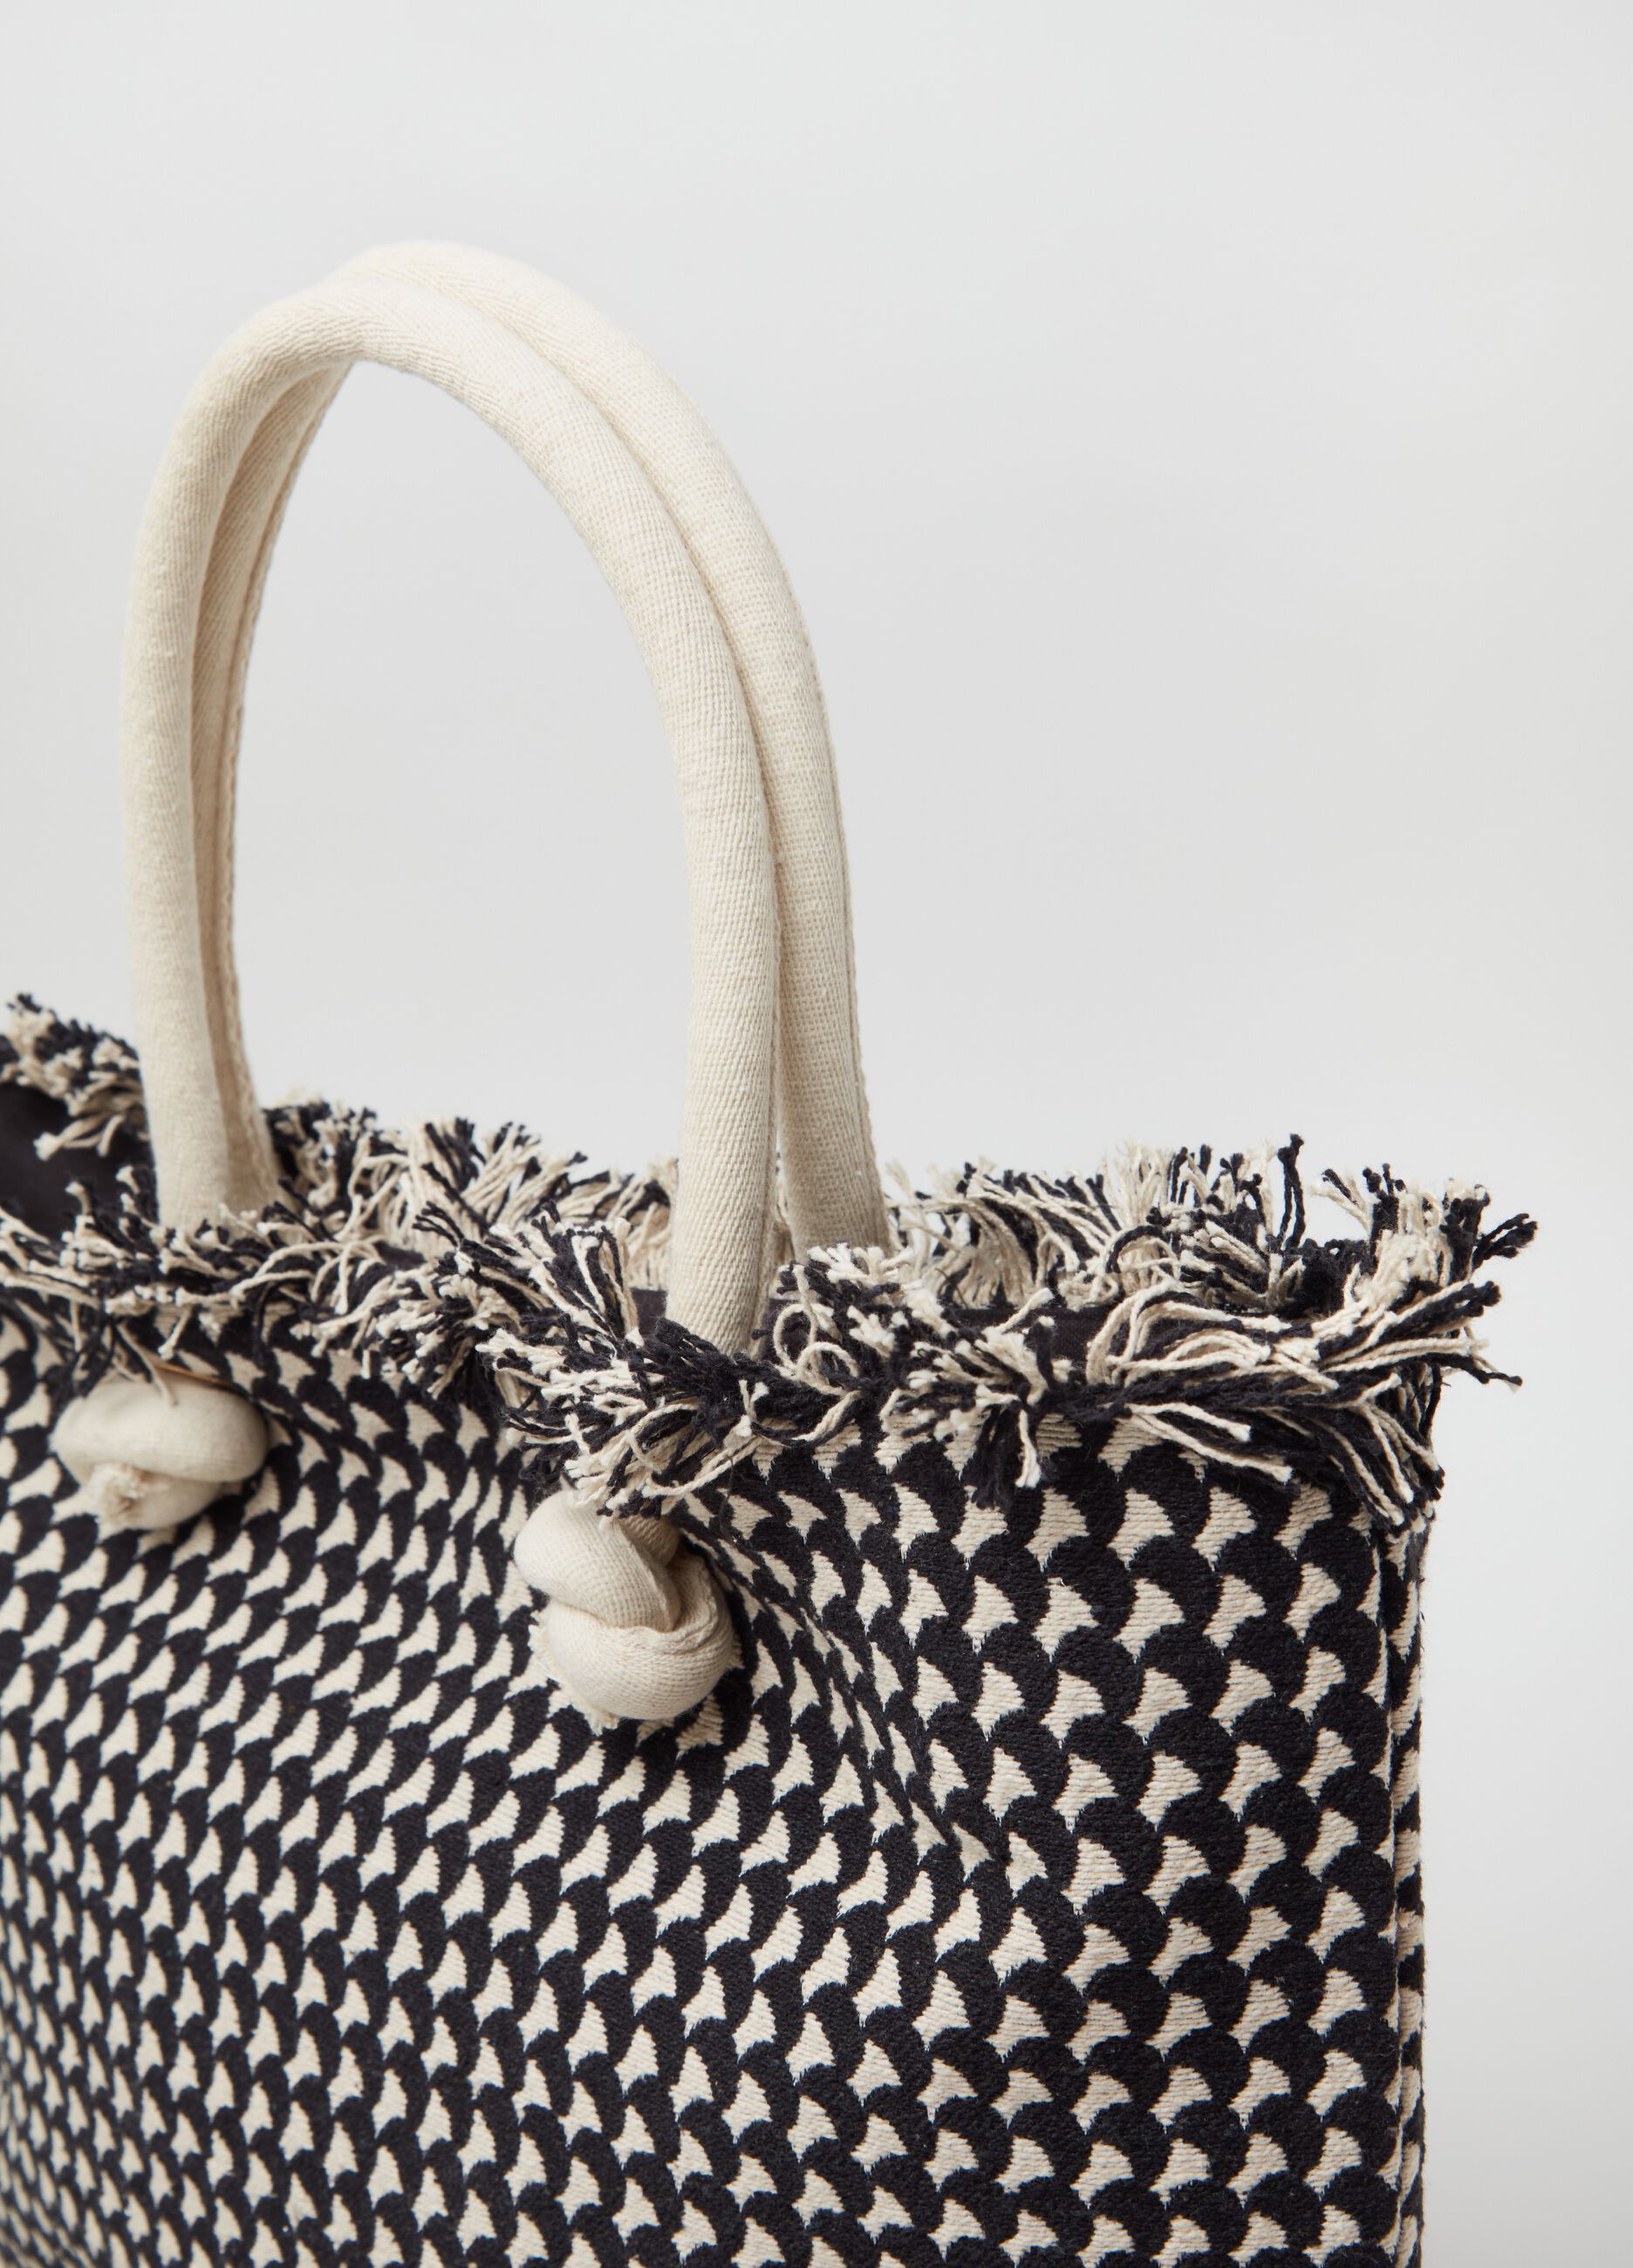 Tote bag with jacquard pattern